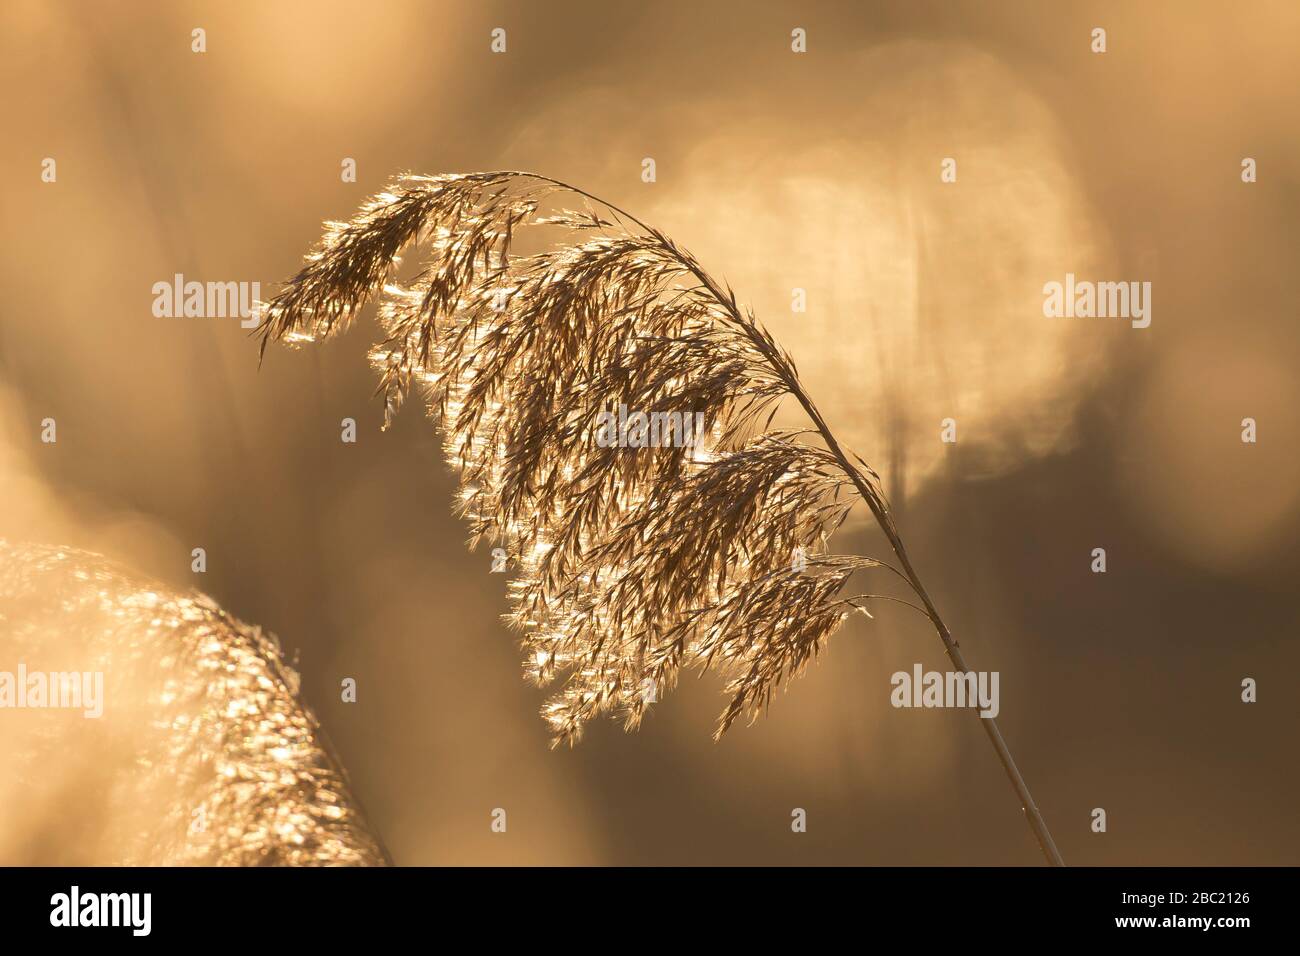 Close up of seed head / seedhead of common reed (Phragmites australis / Phragmites communis) in reed bed / reedbed in winter Stock Photo